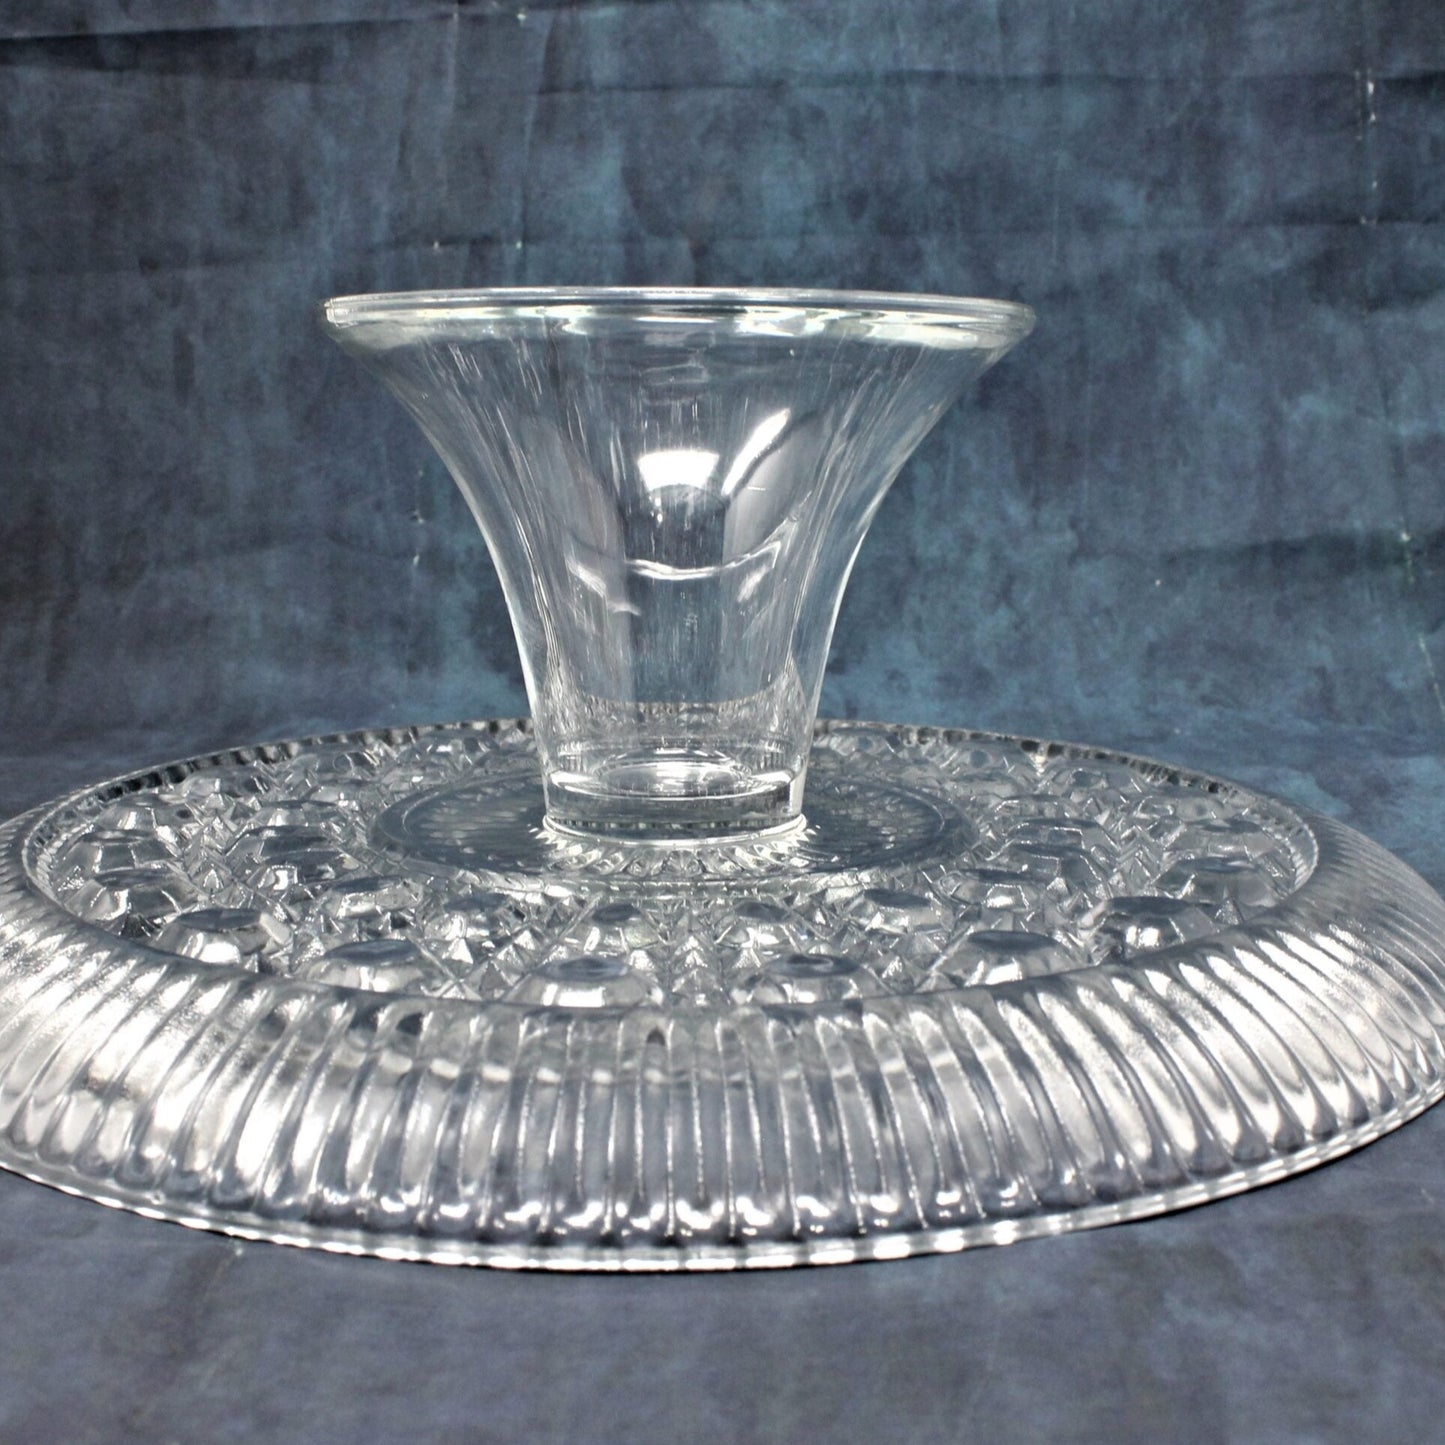 Cake Stand, Federal Glass, Windsor (Button & Cane), Vintage